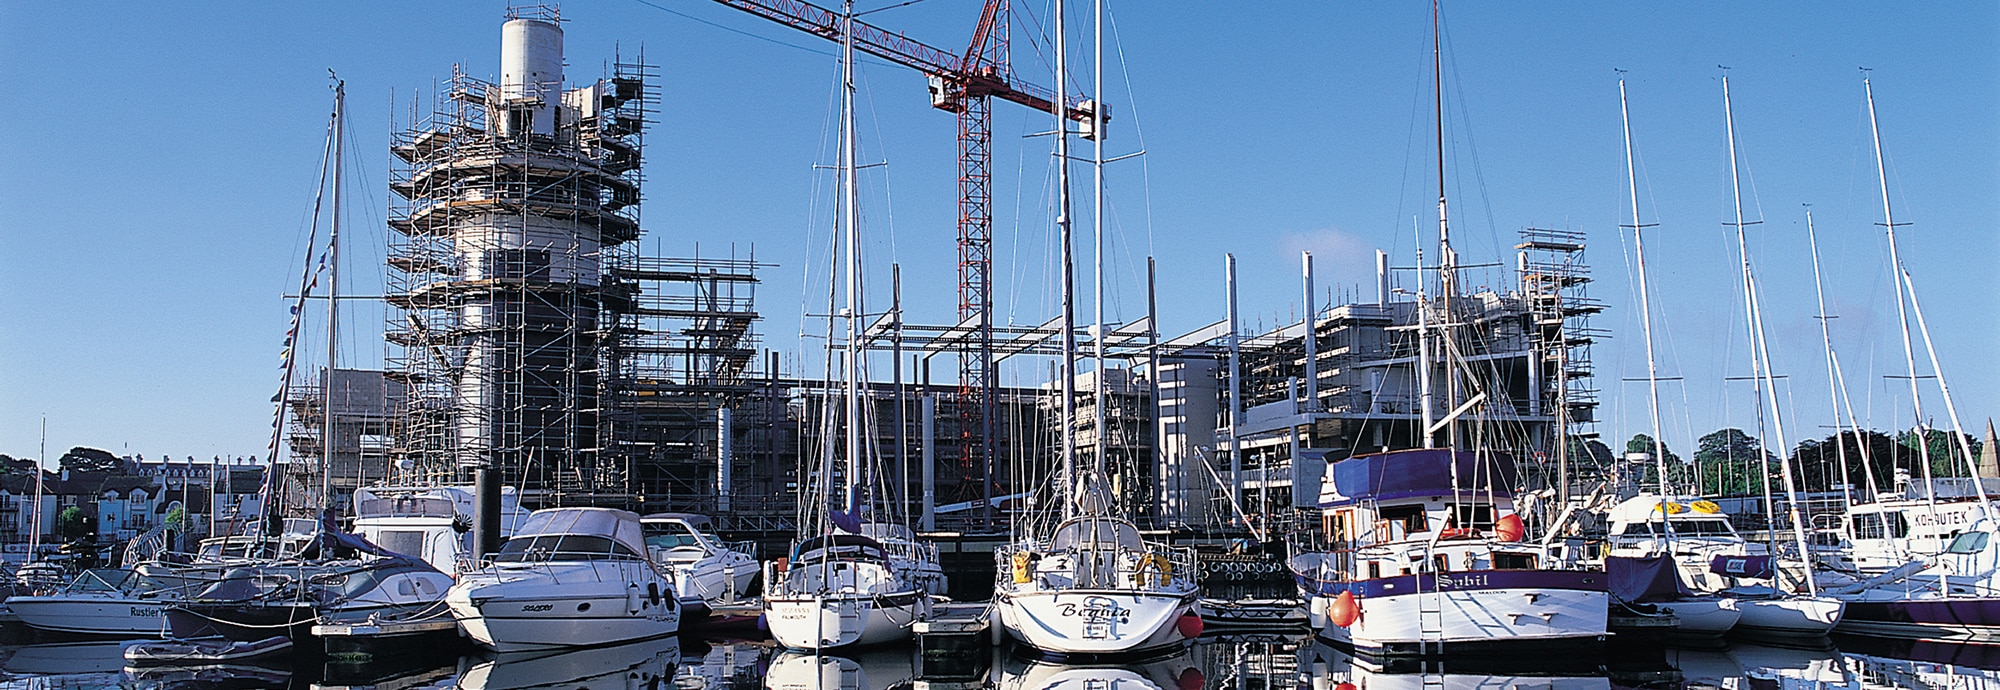 In the foreground, a line of yachts are moored up in Falmouth harbour. In the background, the Museum is covered in scaffolding, in the middle of being built.